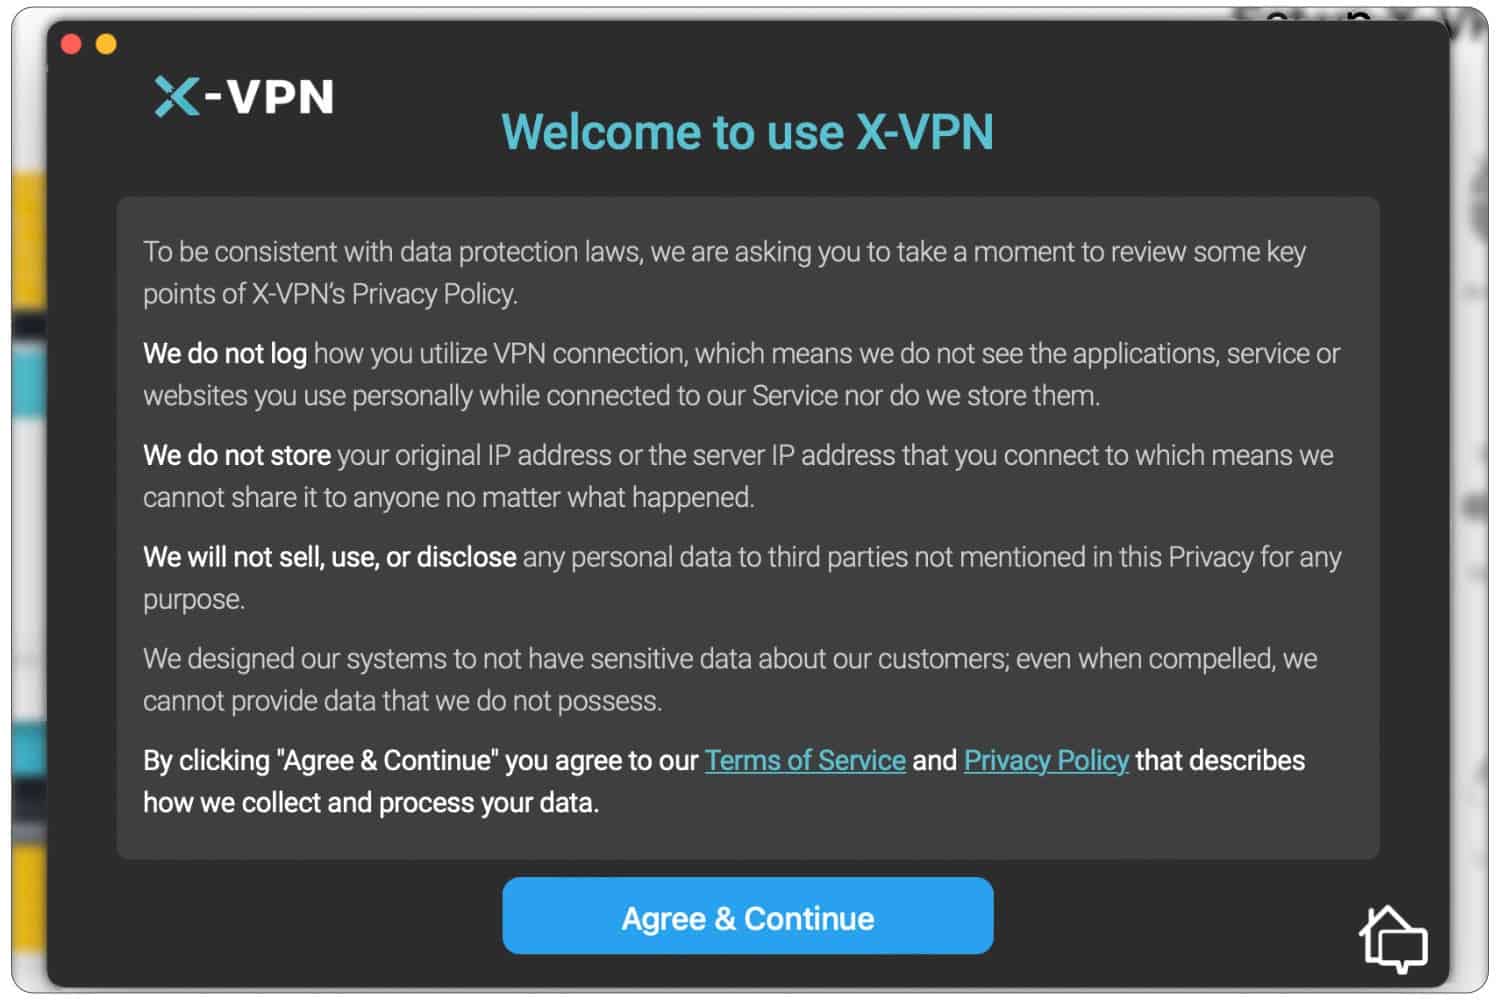 X-VPN’s privacy statement is crystal clear on paper, but what about in action?